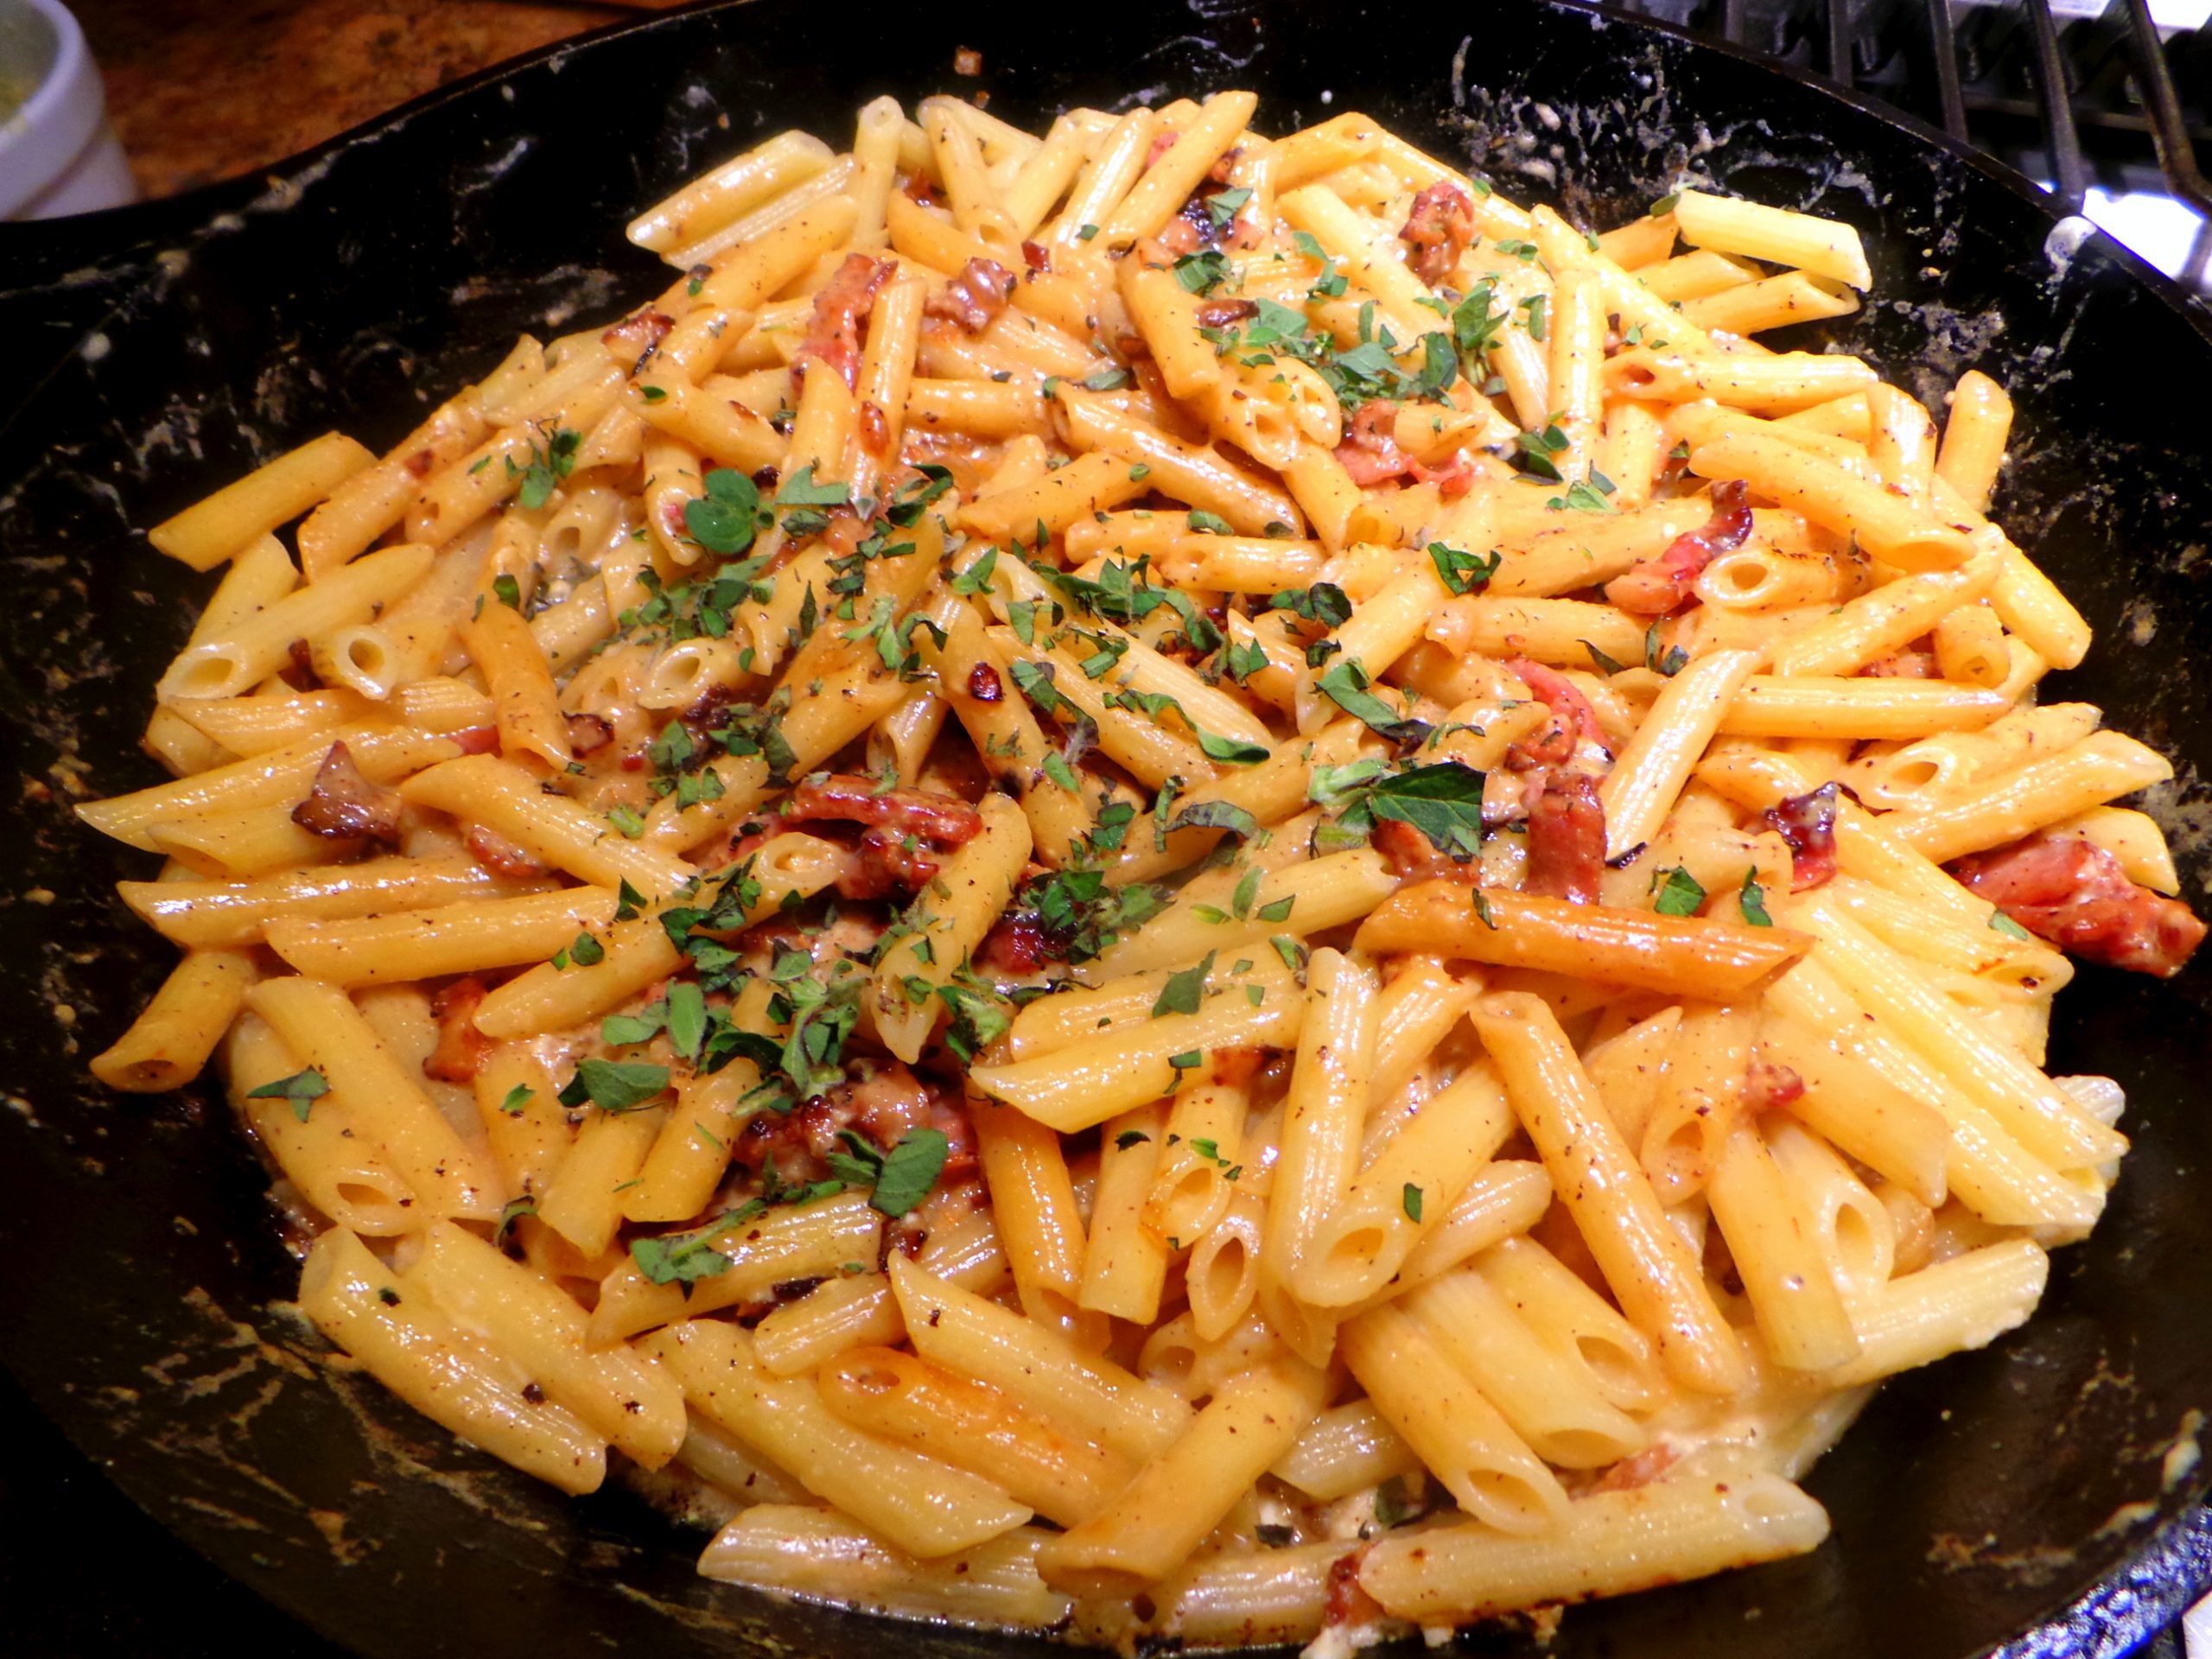 A Pasta Dish for Bacon Lovers